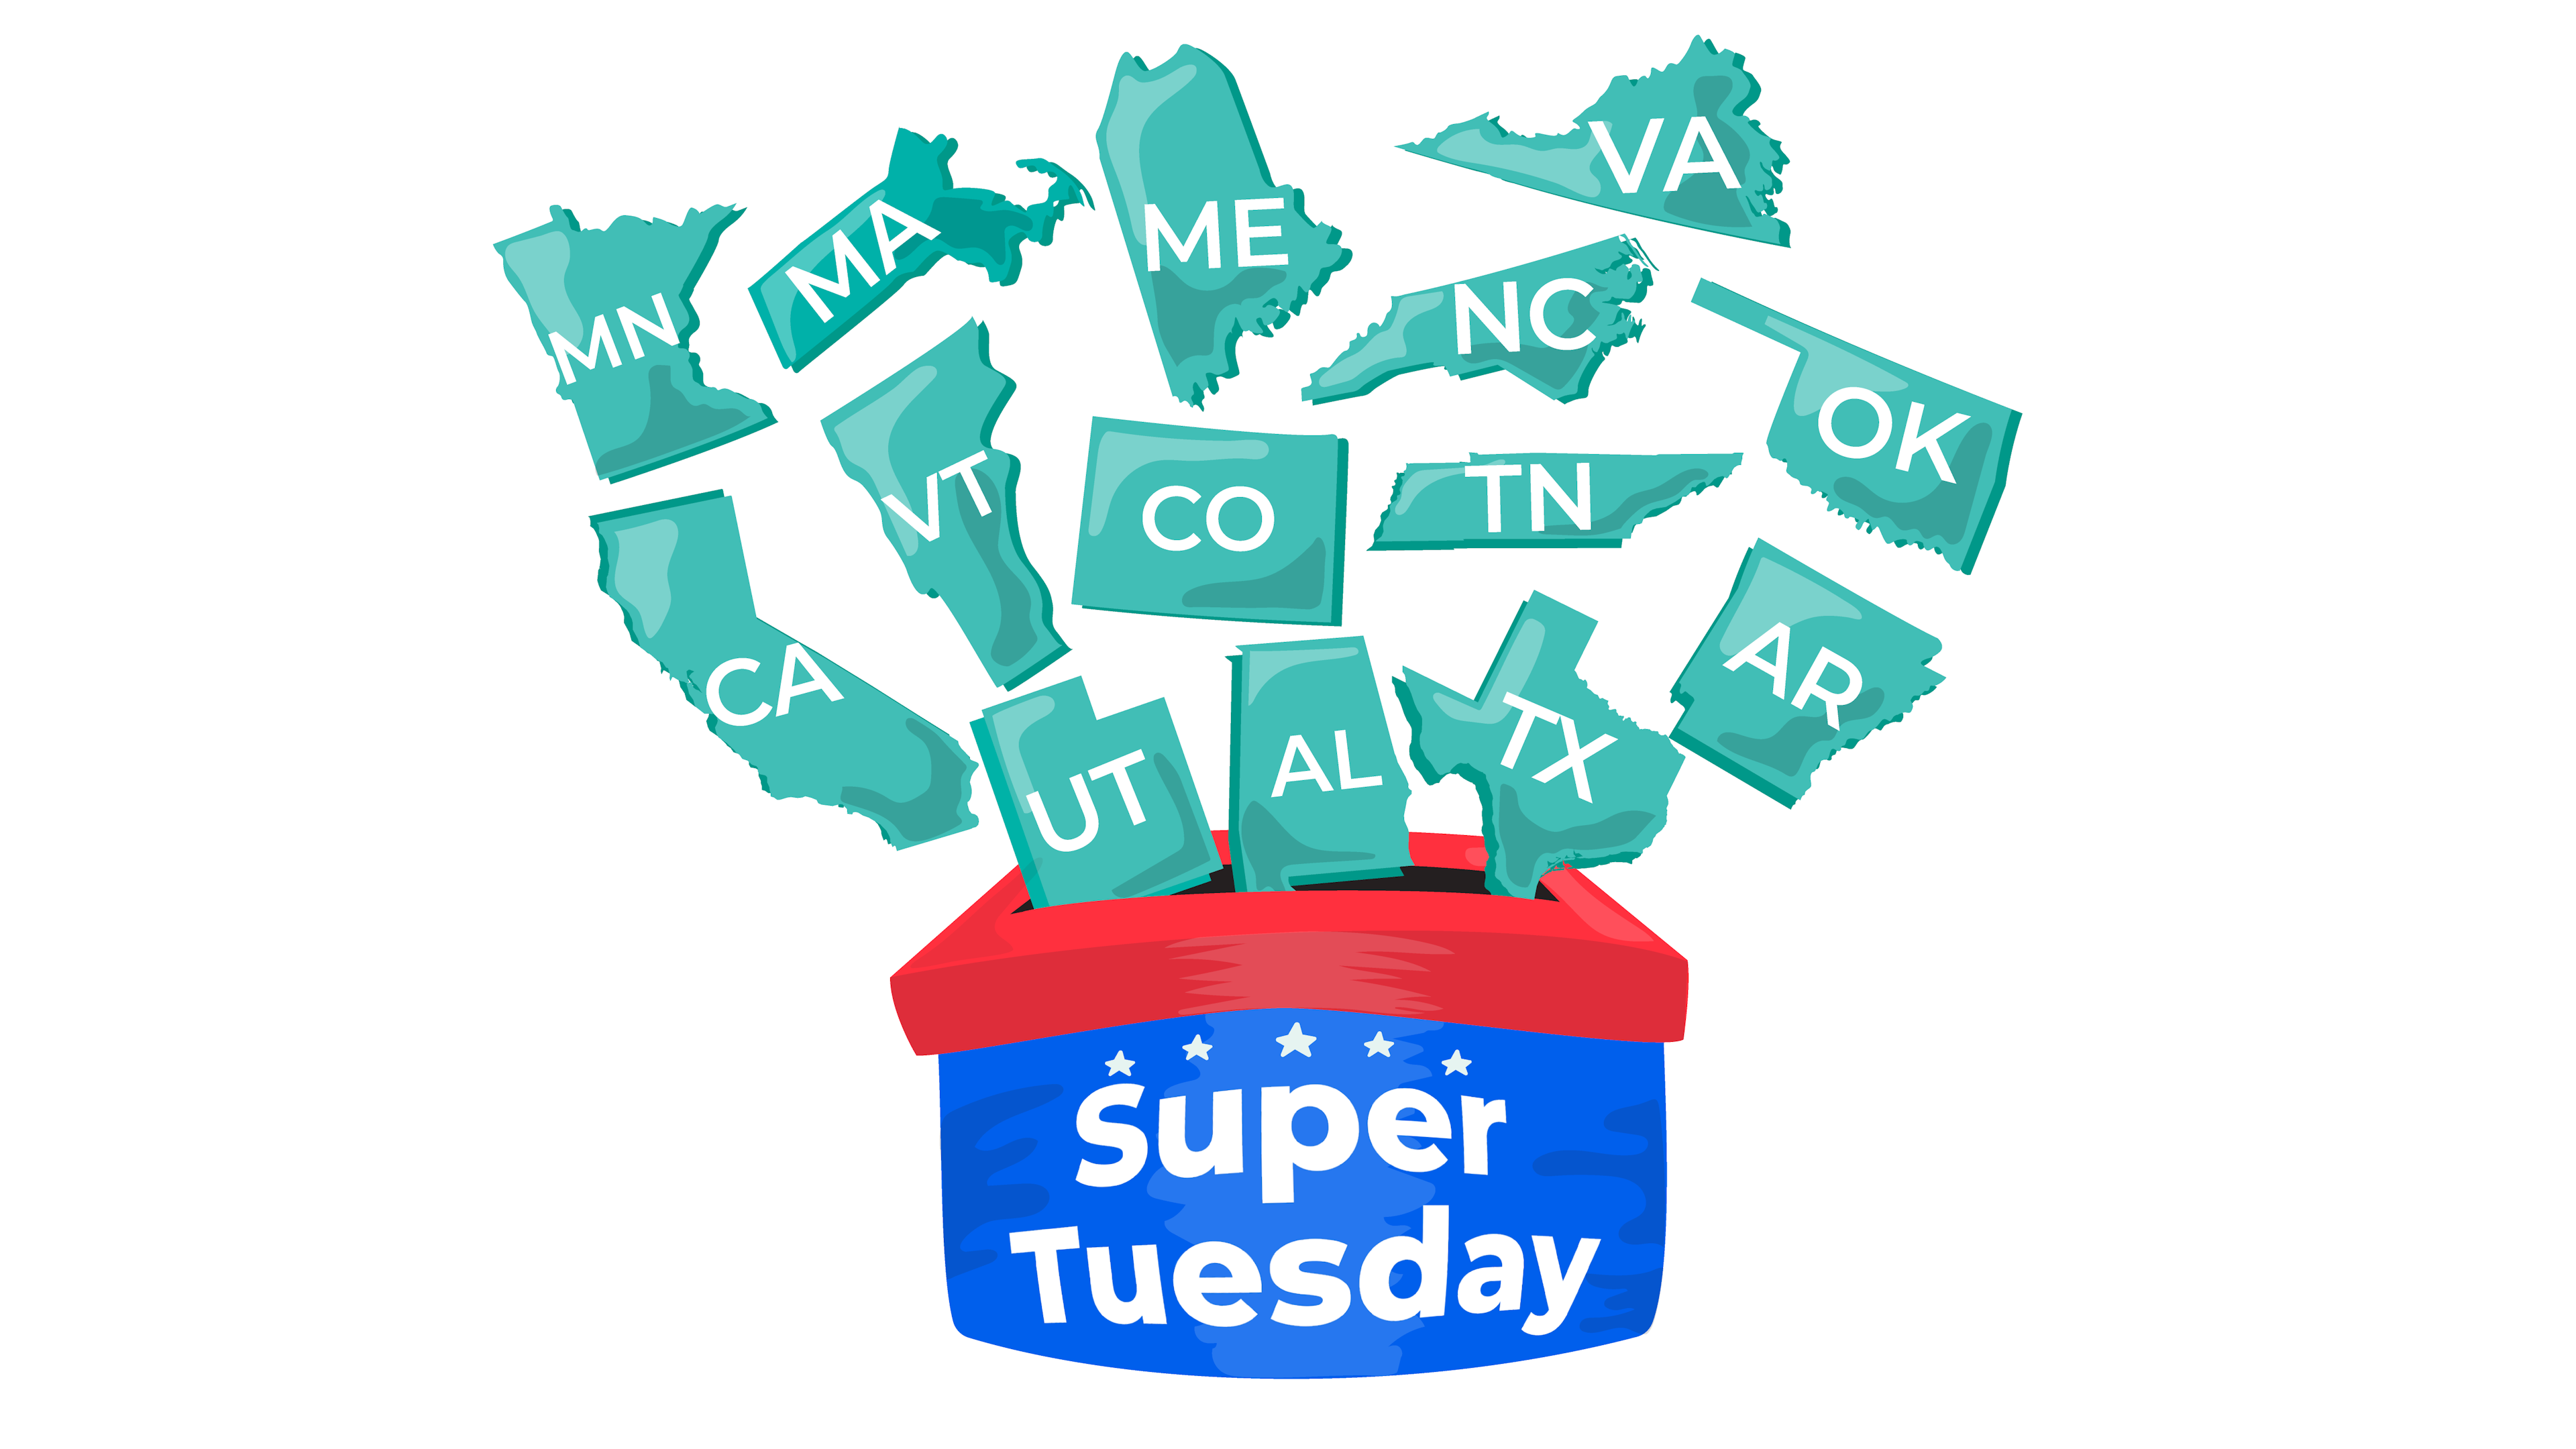 States voting on Super Tuesday